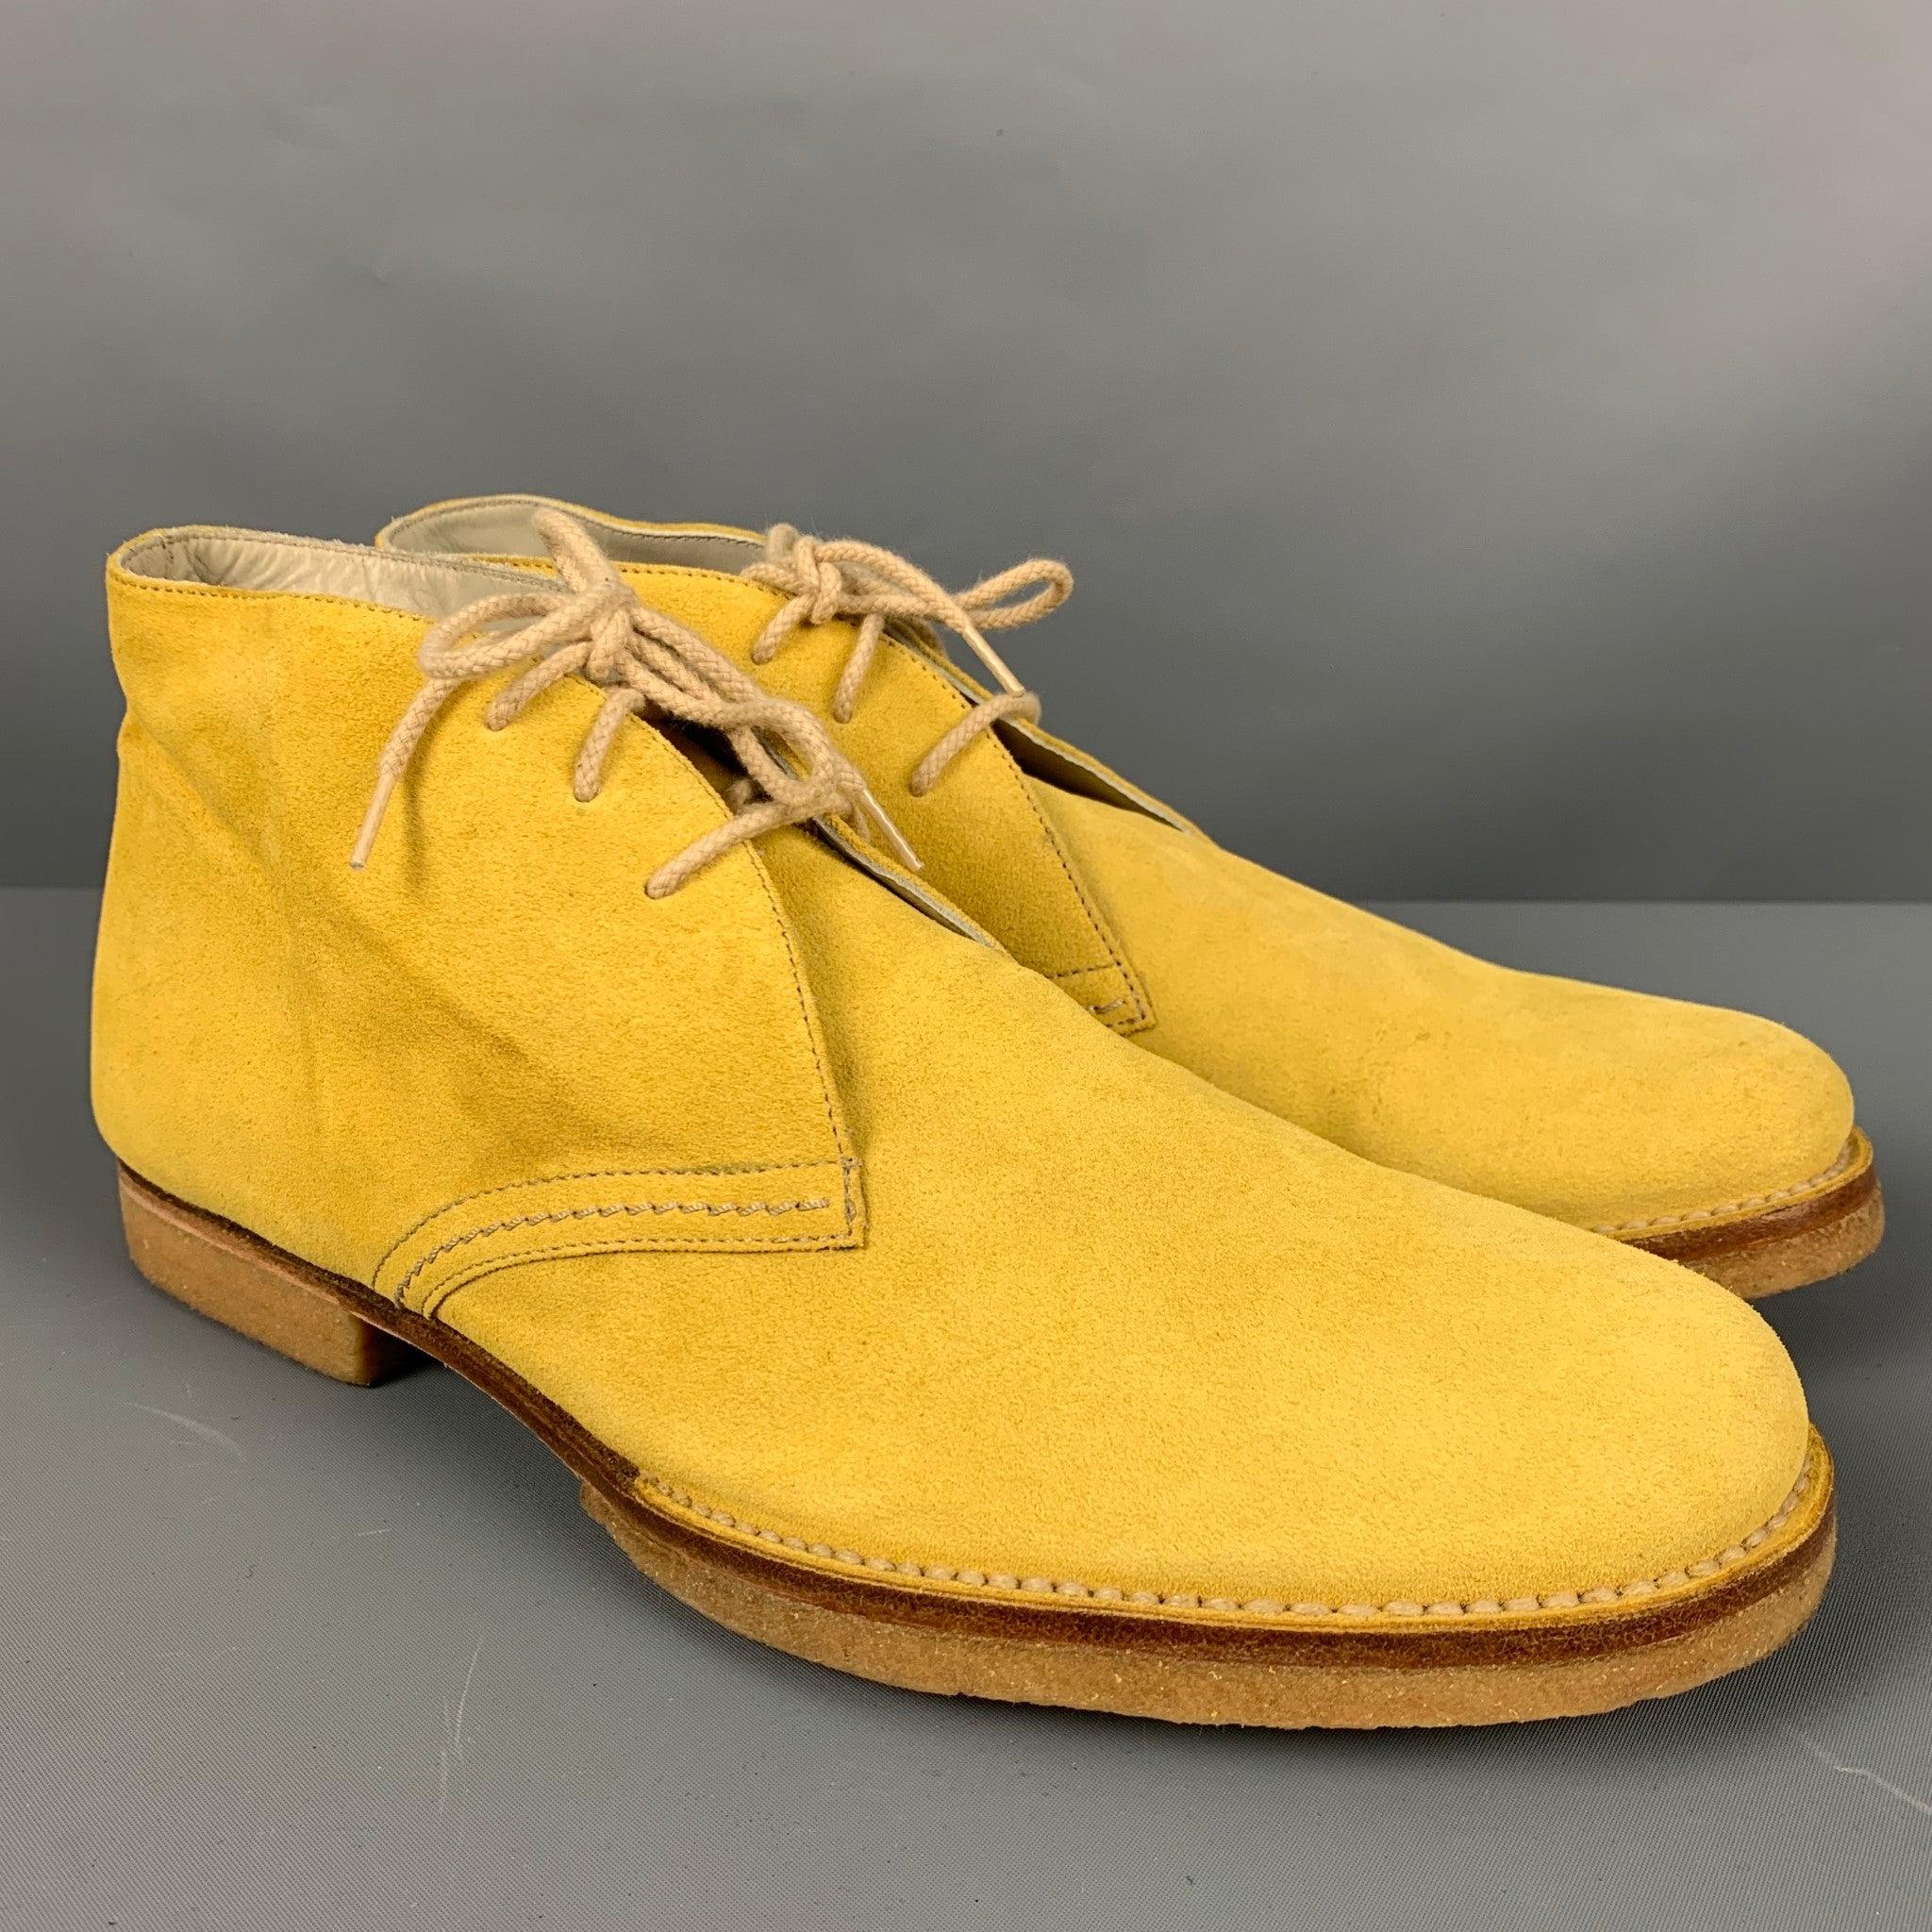 JIL SANDER lace up shoes in a yellow suede featuring a chukka style. Made in Spainches Very Good Pre-Owned Condition. Moderate signs of wear. 

Marked:   9Outsole:11.75 inches  x 4 inches  
  
  
 
Reference: 127172
Category: Lace Up Shoes
More